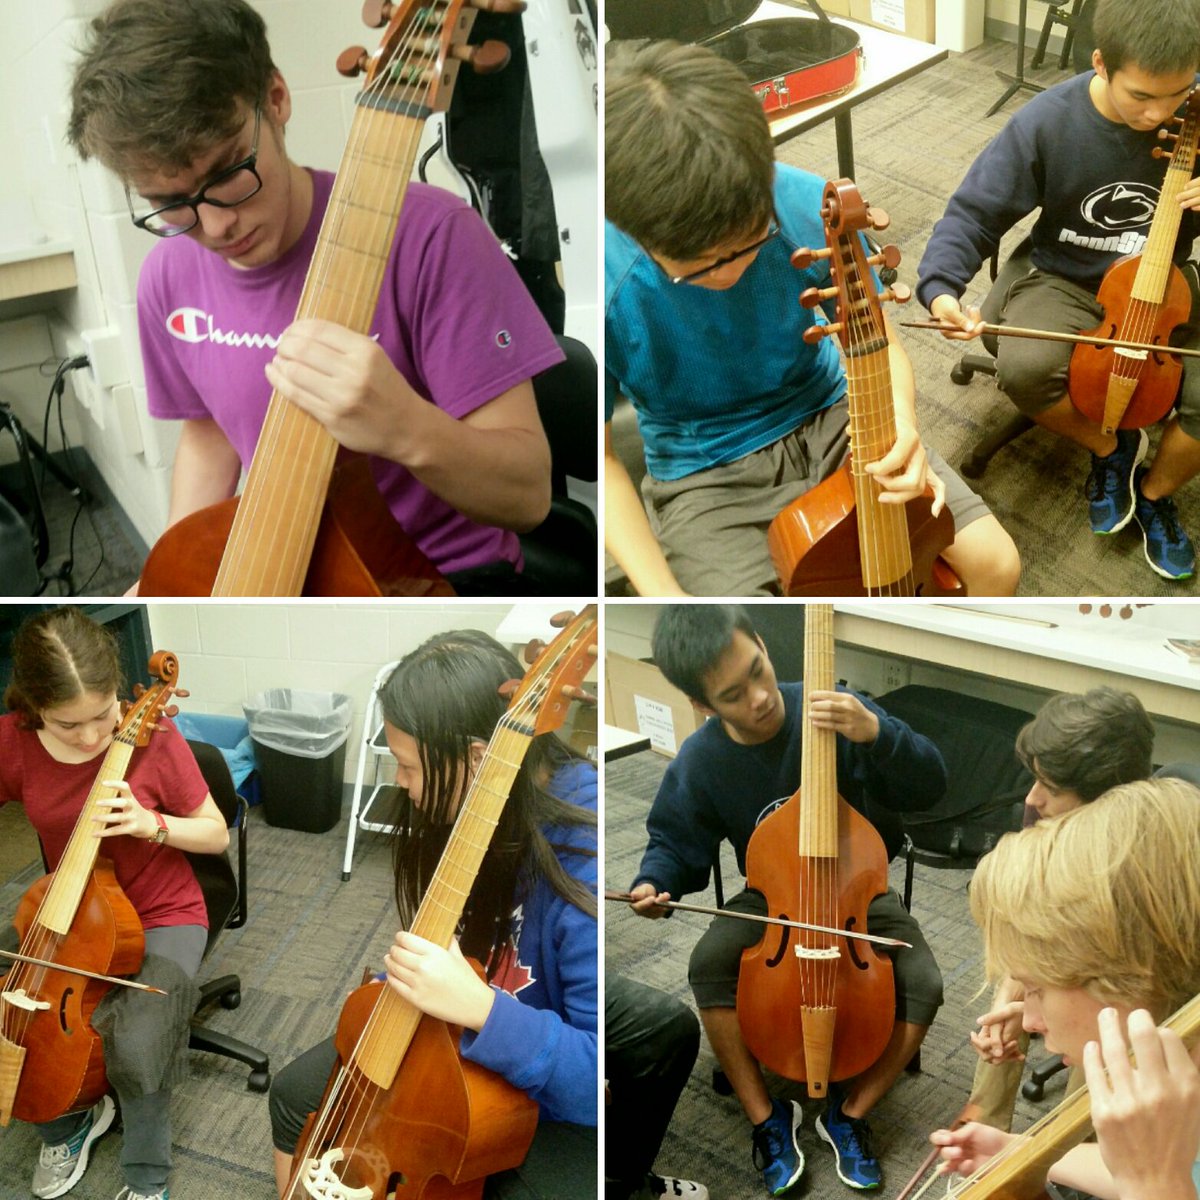 instagram.com/p/BngvISsn3ug/ #TryTheViol for @StevensonHS #Orchestra & #Guitar students directed by @SHSBaroqueEns member @AlbLua & #Viol #Consort director @PhillipWSerna! #A415Rocks! #ViolConsort #EarlyMusic on #PeriodInstruments @ @StevensonHS! @SHS_FineArts facebook.com/story.php?stor…